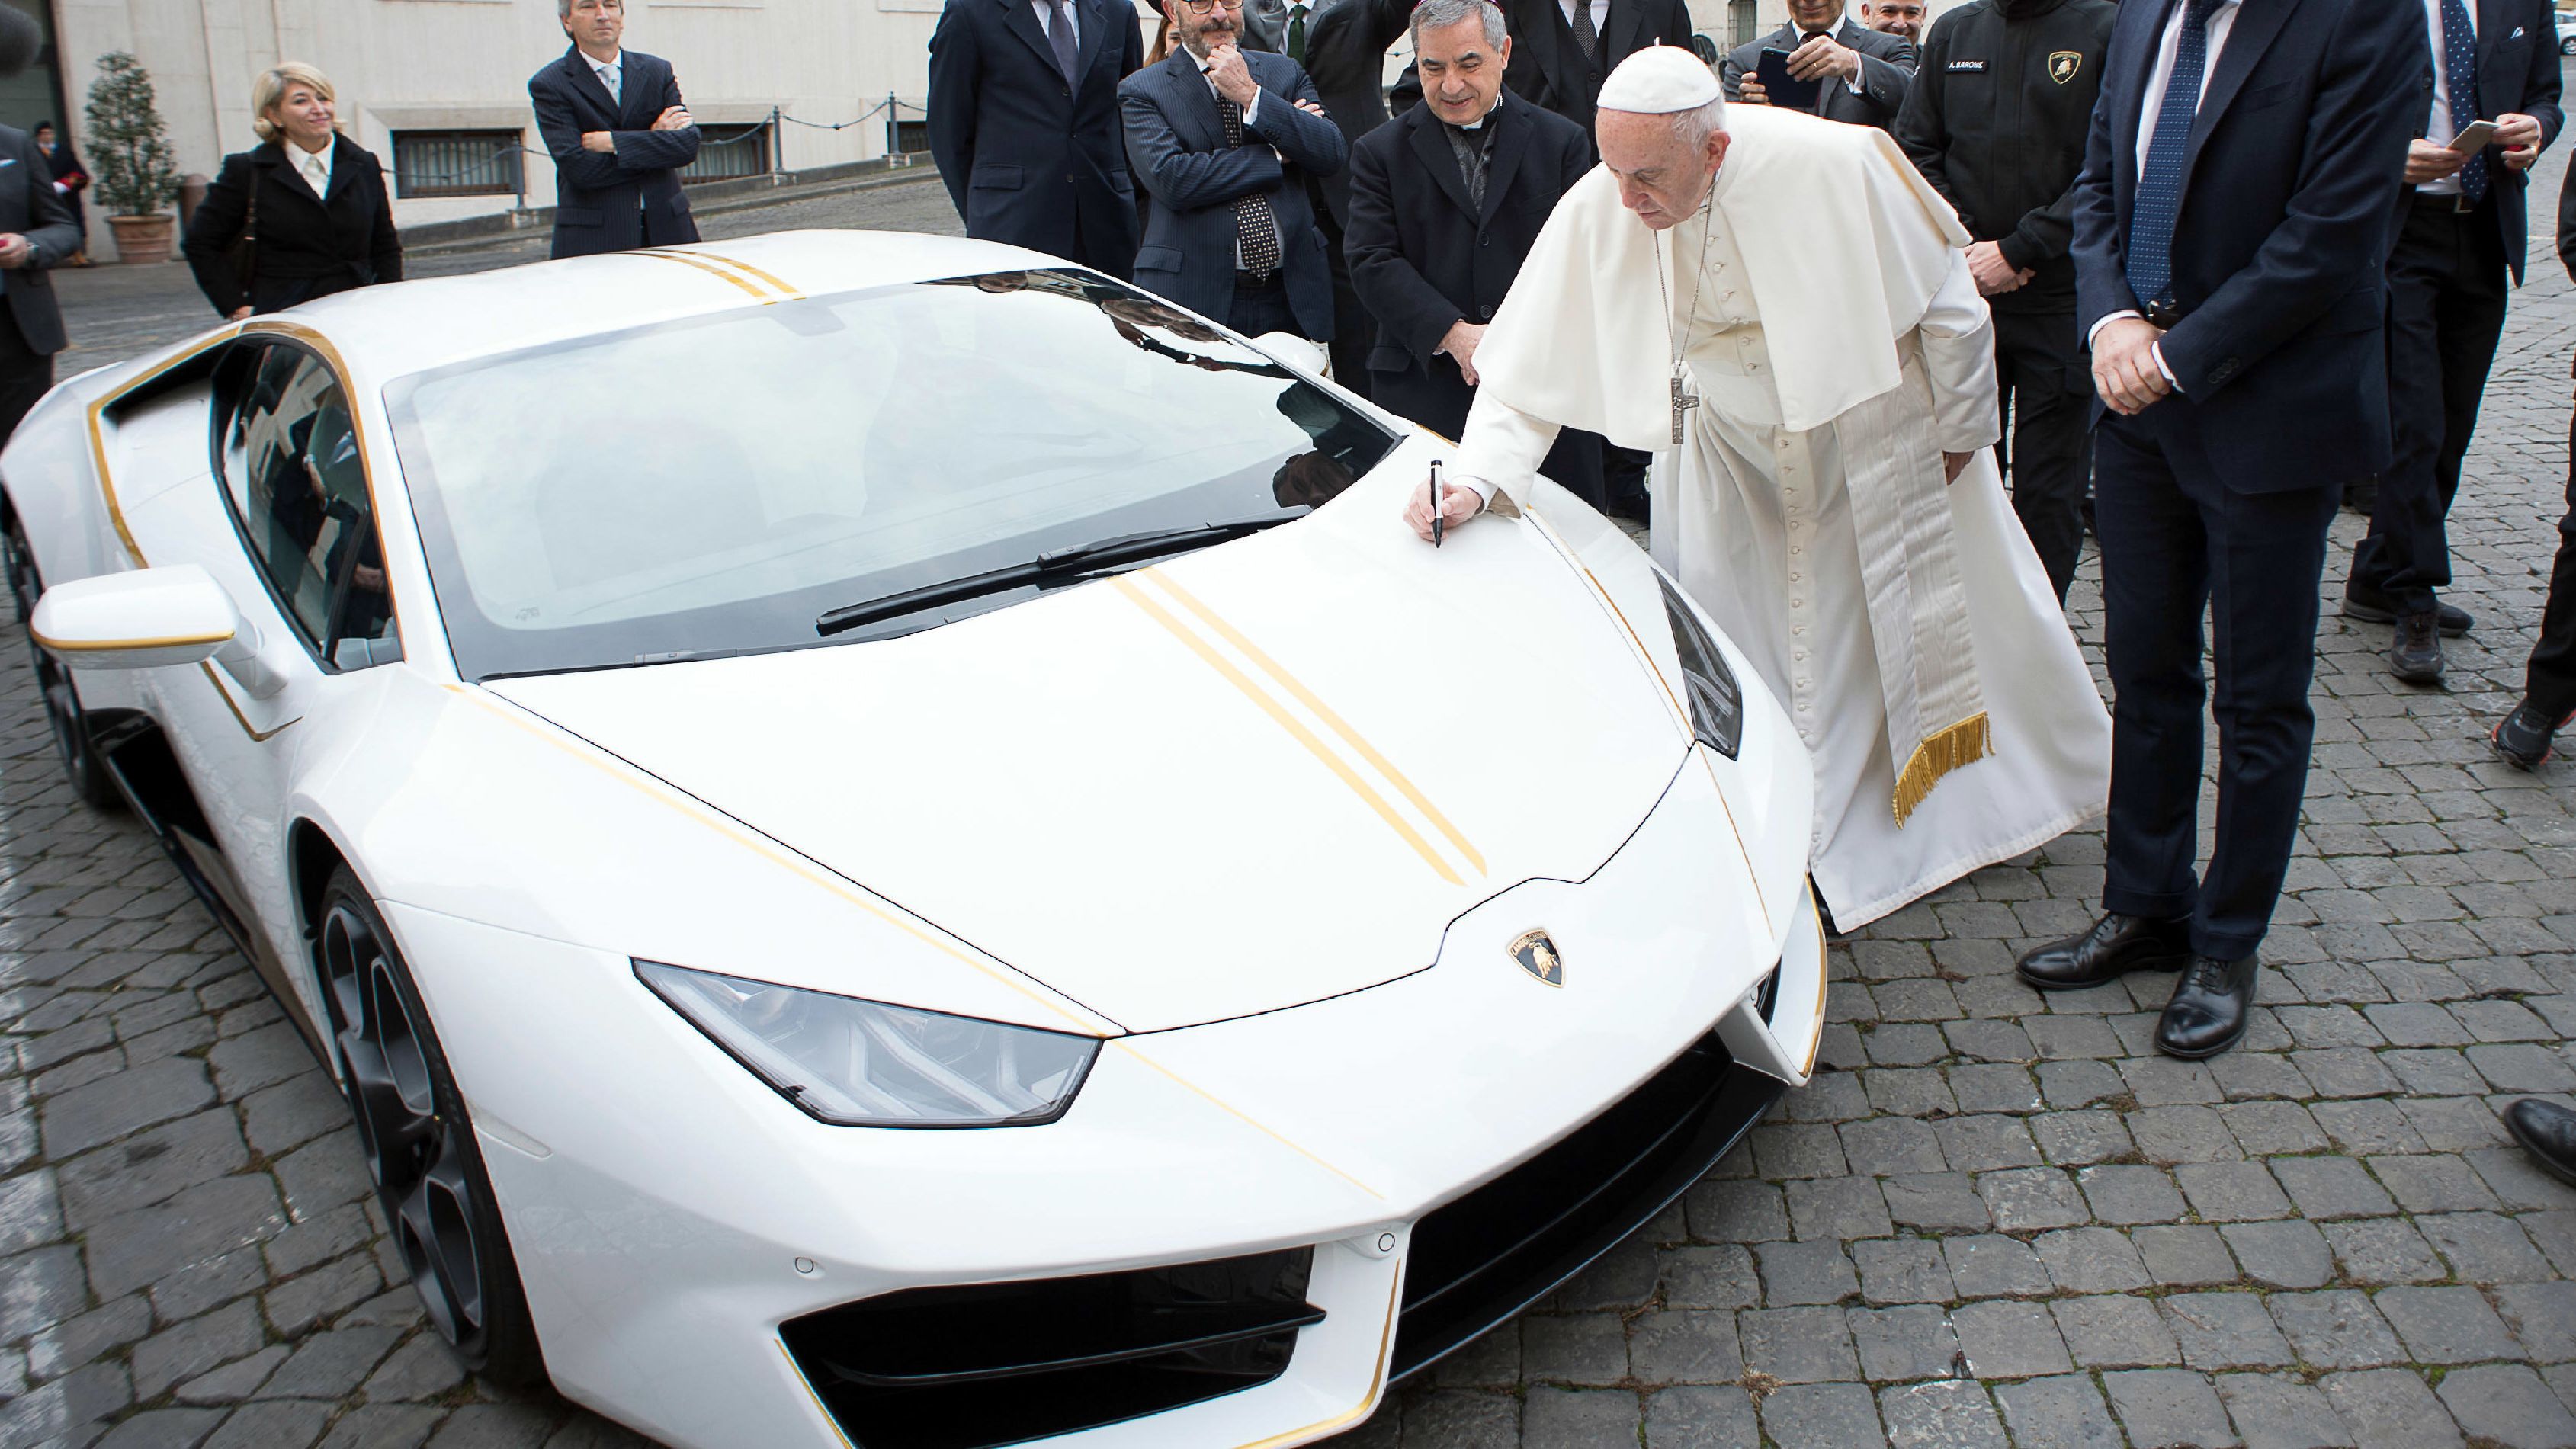 Pope Francis gets a snazzy new Lamborghini -- and auctions it off | CNN